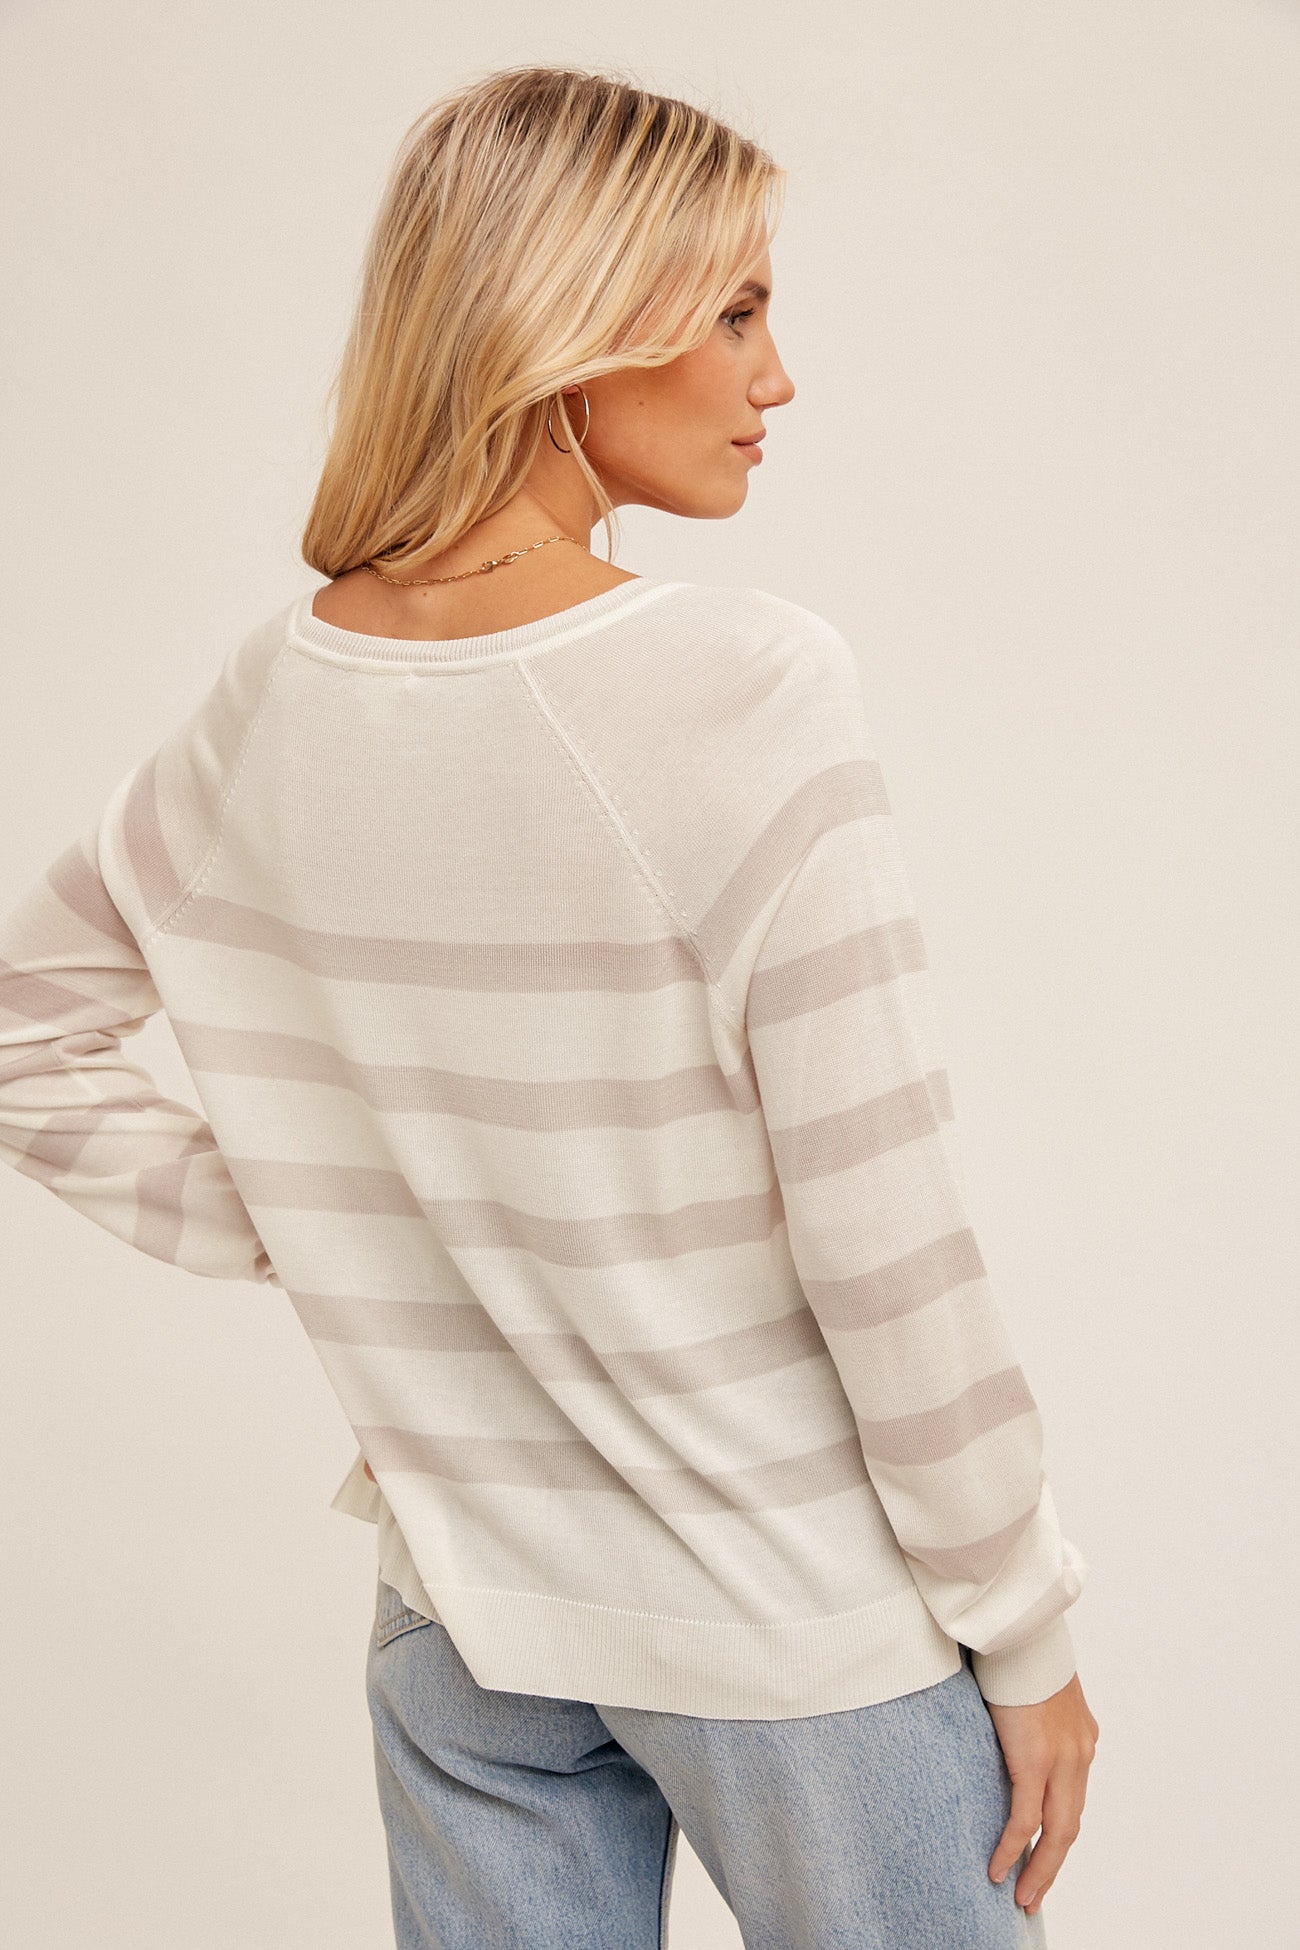 Raglan Sleeve Striped Pullover Sweater - White/Taupe